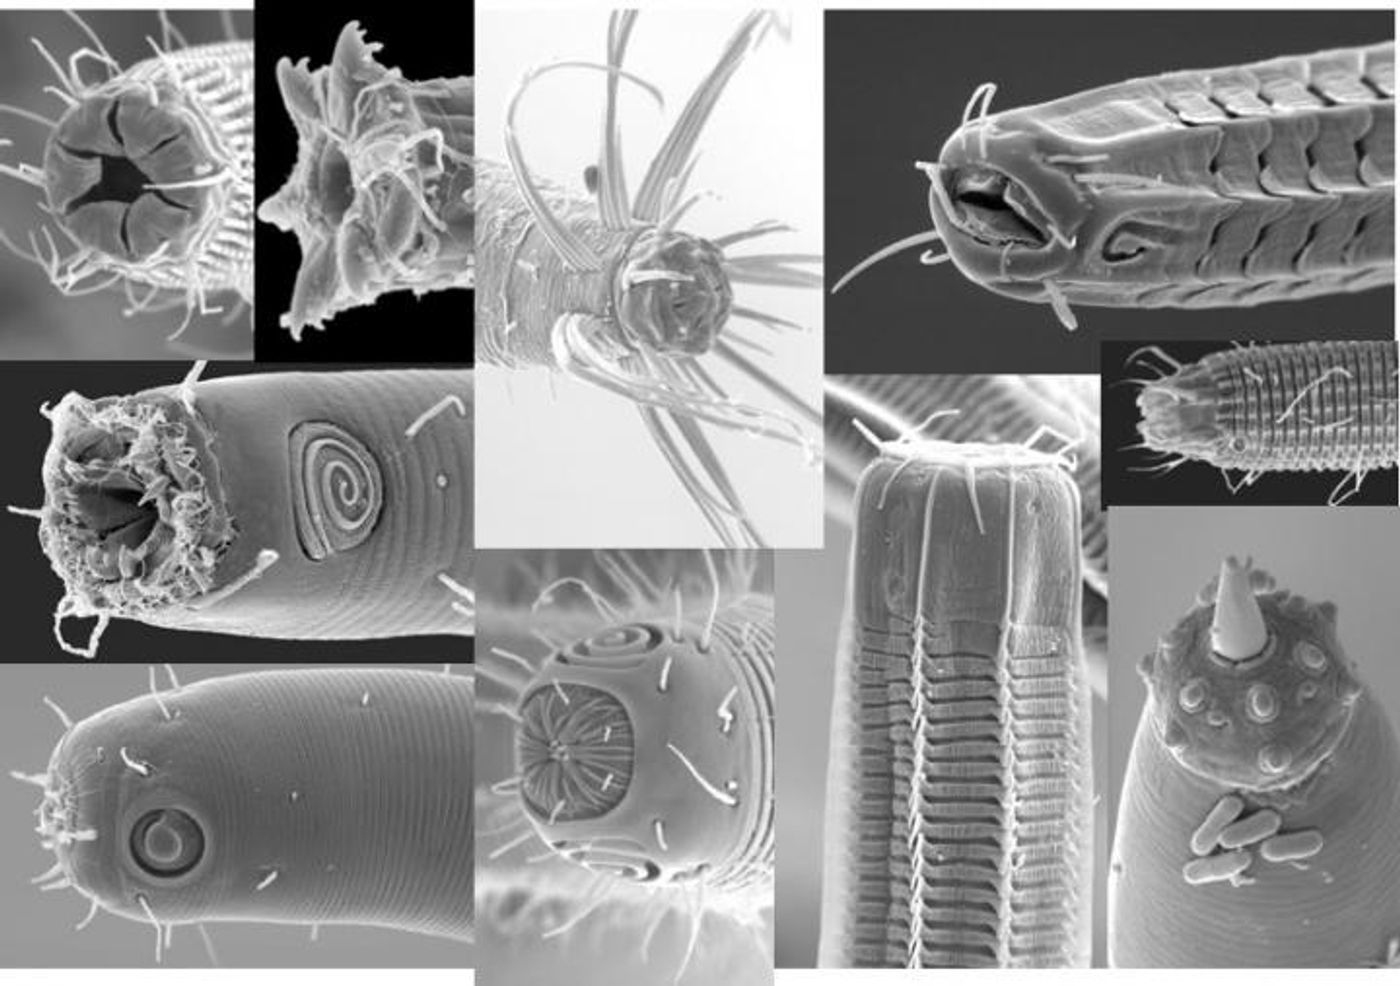 Scanning electron microscopy of marine nematodes. UCR's Holly Bik is one of the few researchers studying the microbiomes of invertebrate animals. / Credit: James Baldwin and Manuel Mundo-Ocampo, UC Riverside